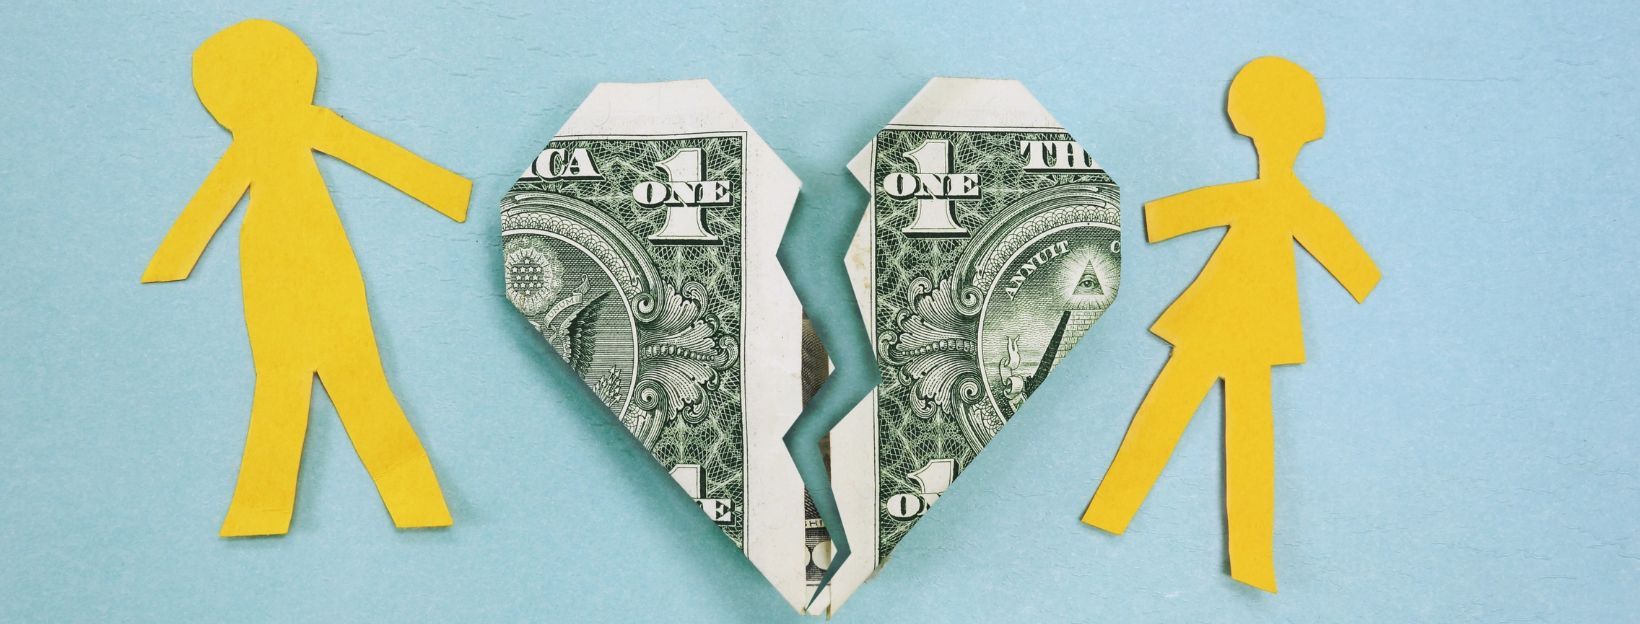 Gray Divorce, New Relationships, and Financial Security